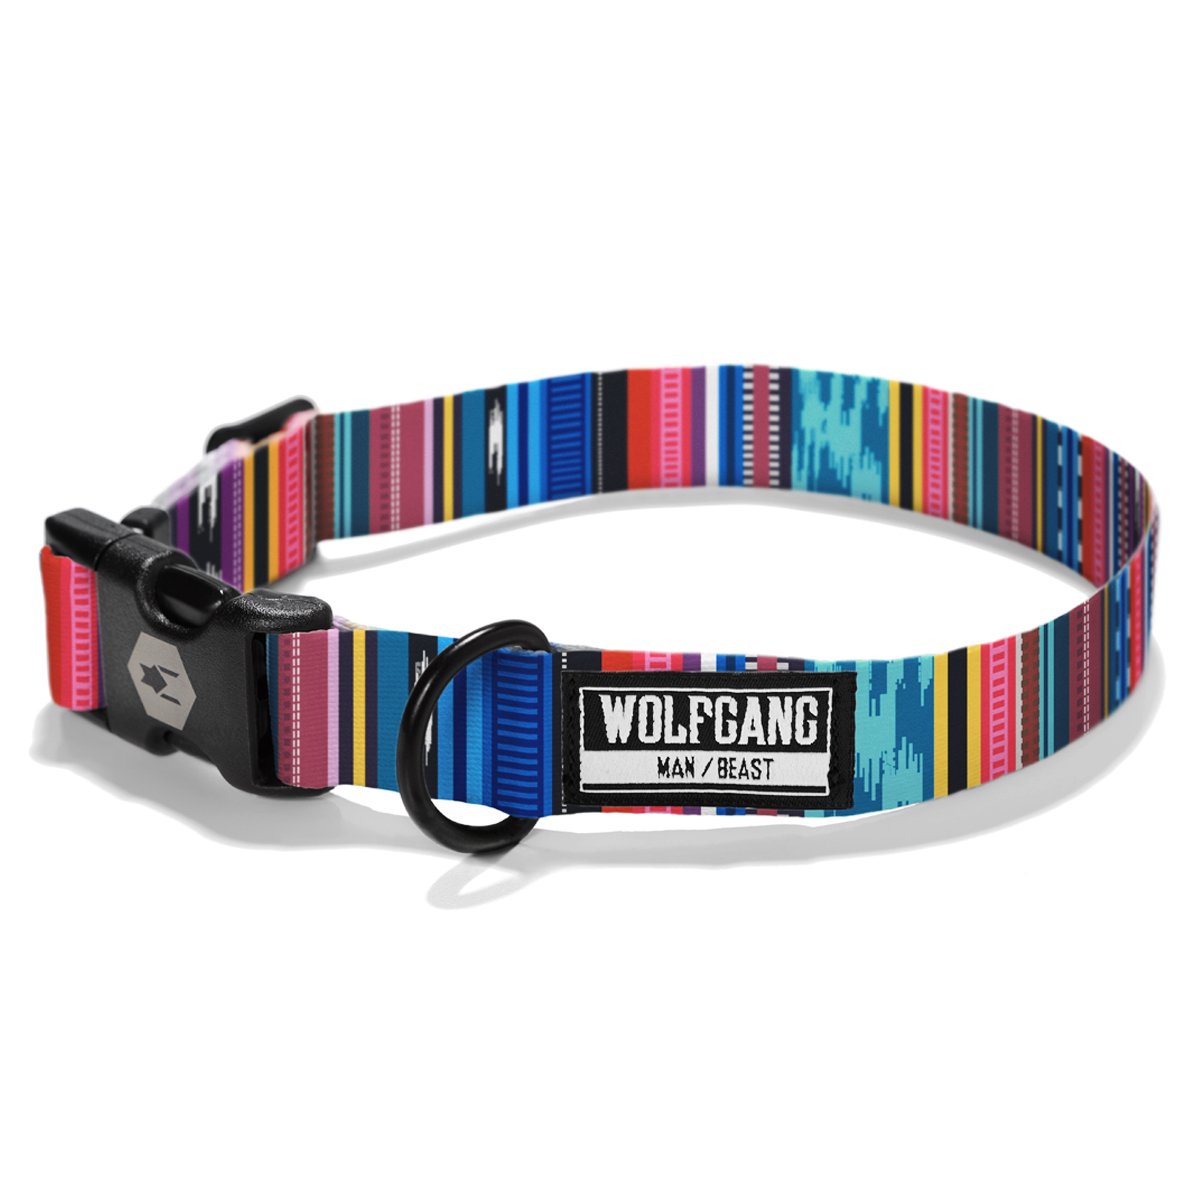 Quetzal DOG COLLAR Made in the USA by Wolfgang Man & Beast